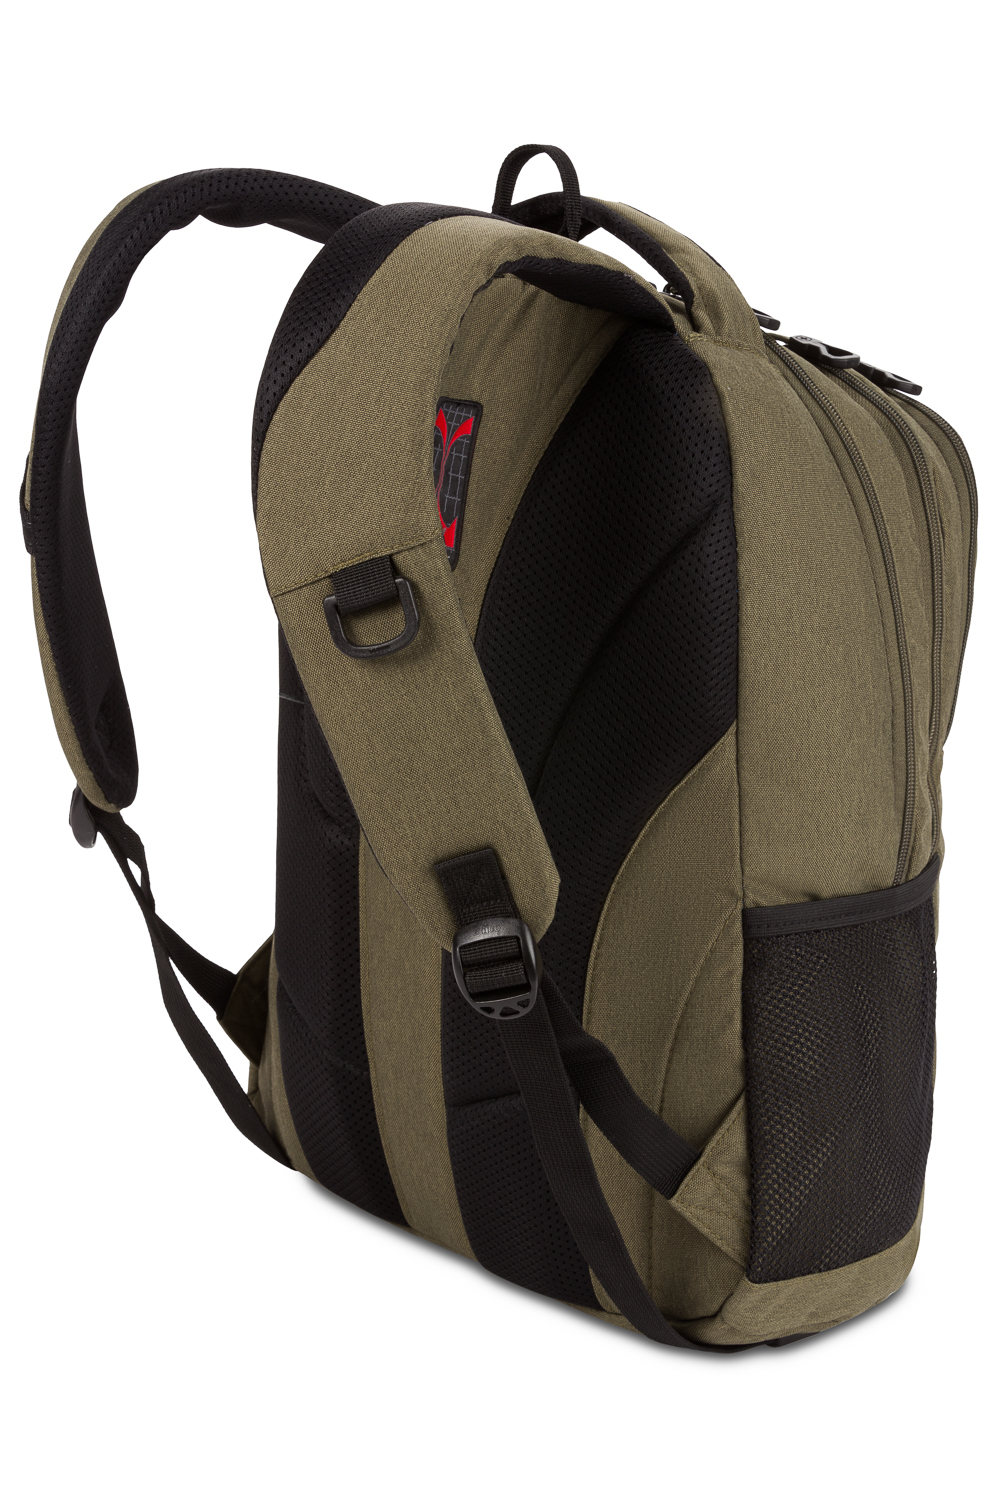 SwissGear Cecil 5505 Laptop Backpack Olive 